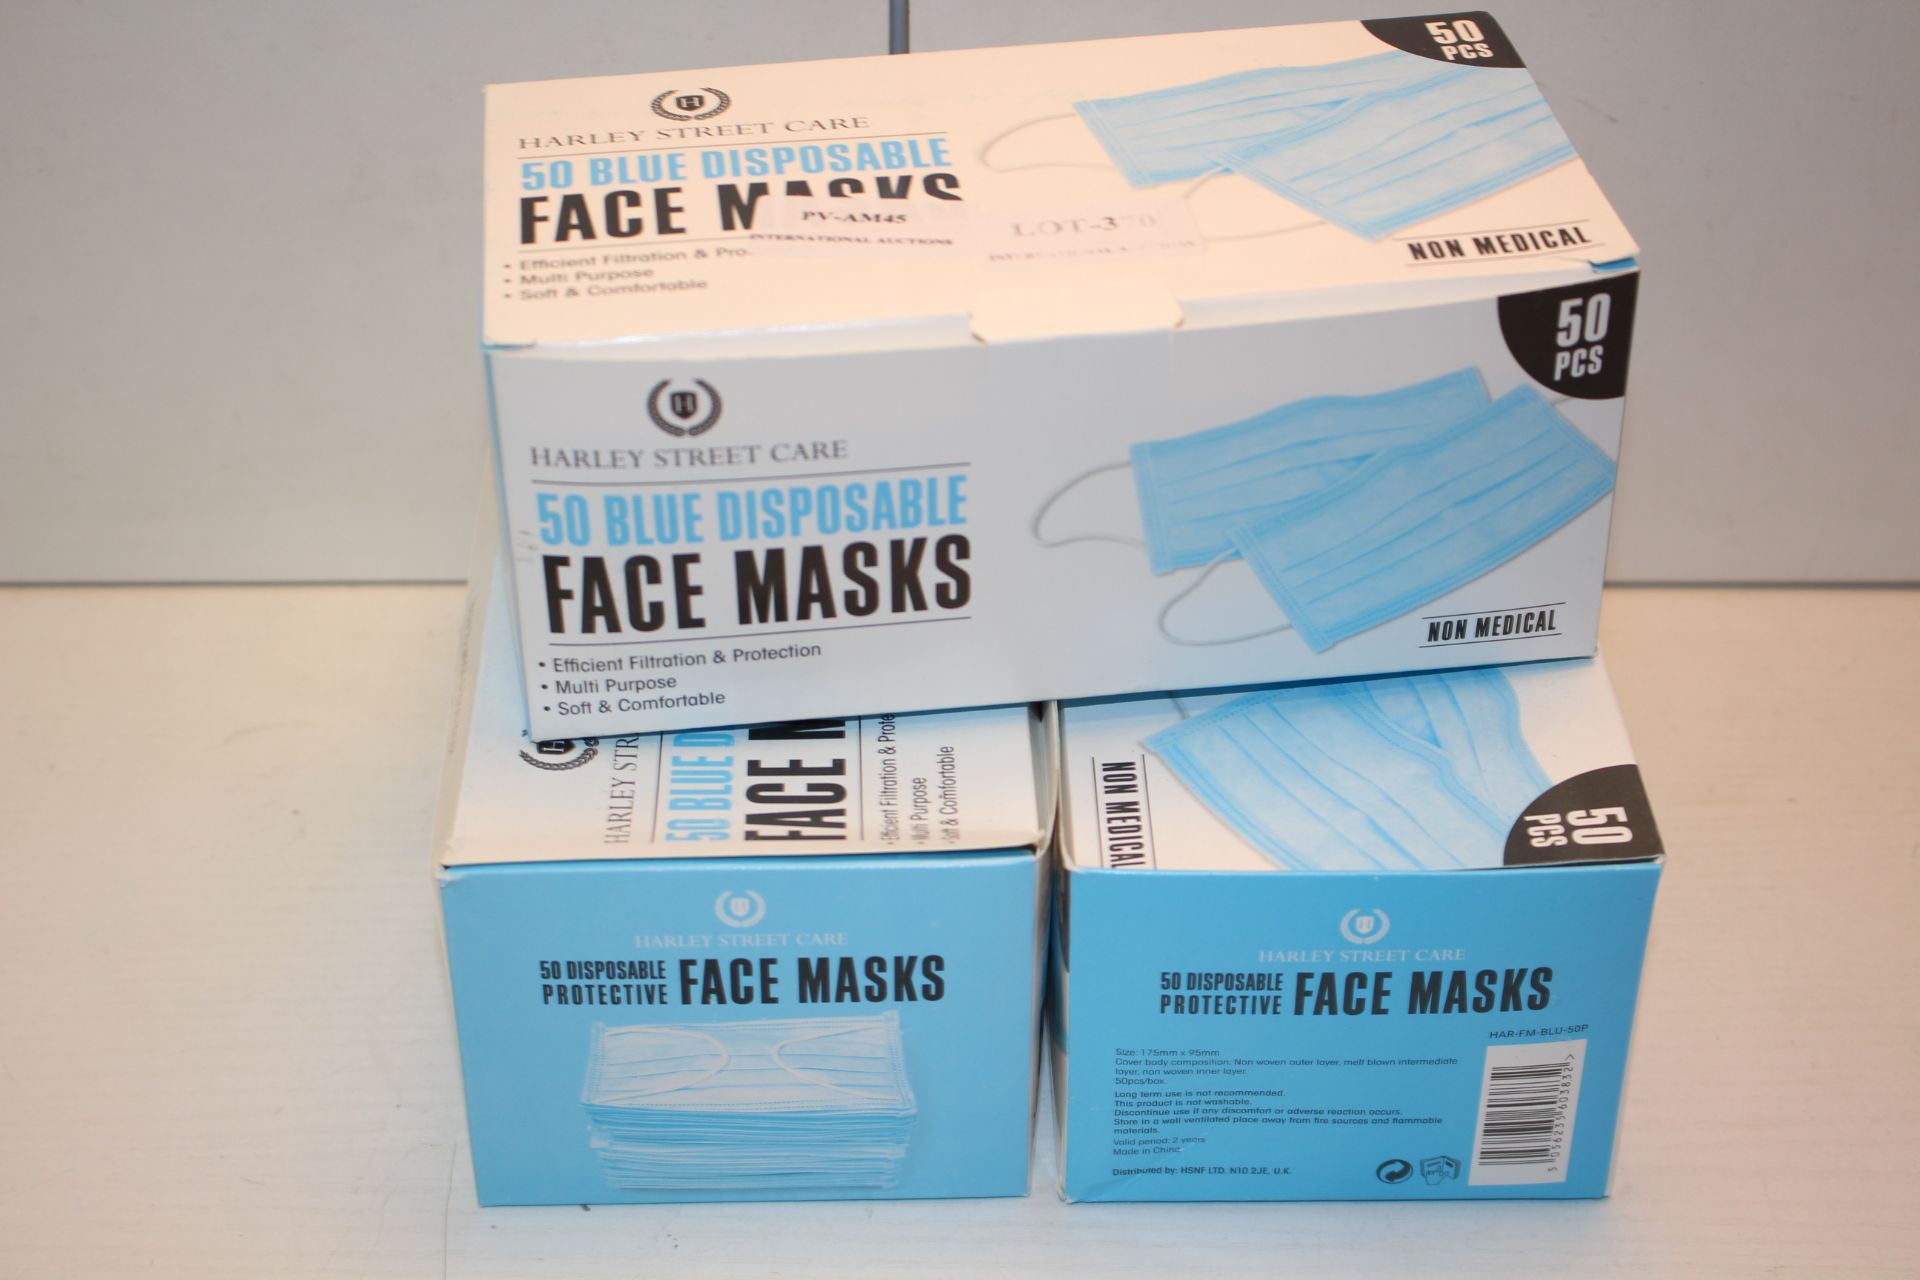 3X BOXES HARLEY STREET CARE BLUE DISPOSABLE FACE MASKS - NON MEDICAL Condition ReportAppraisal